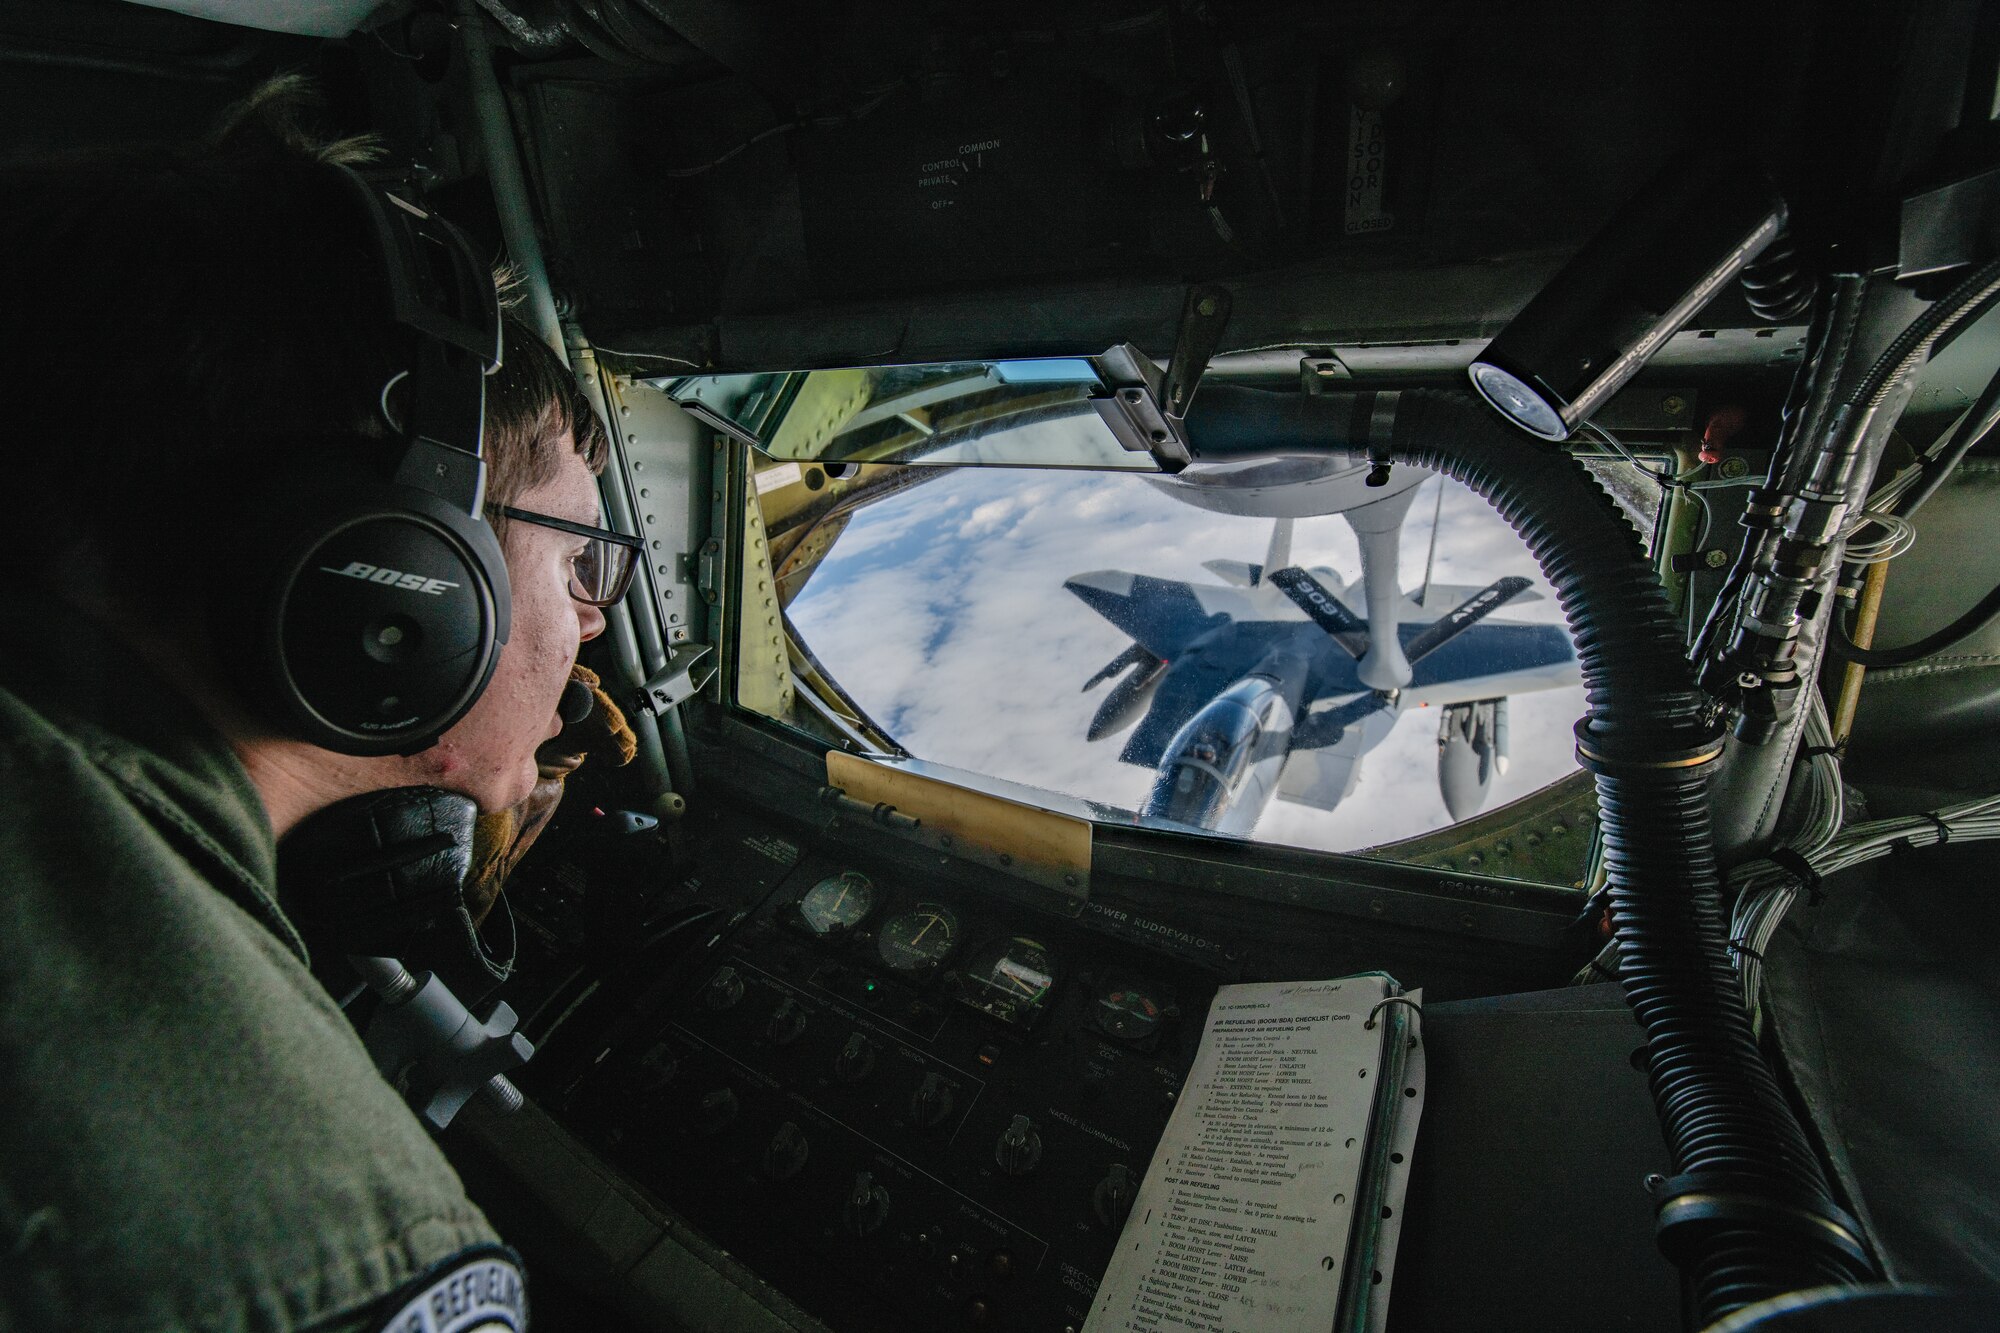 A boom operator looks out the back of a KC-135 Stratotanker at a fighter jet he's refueling